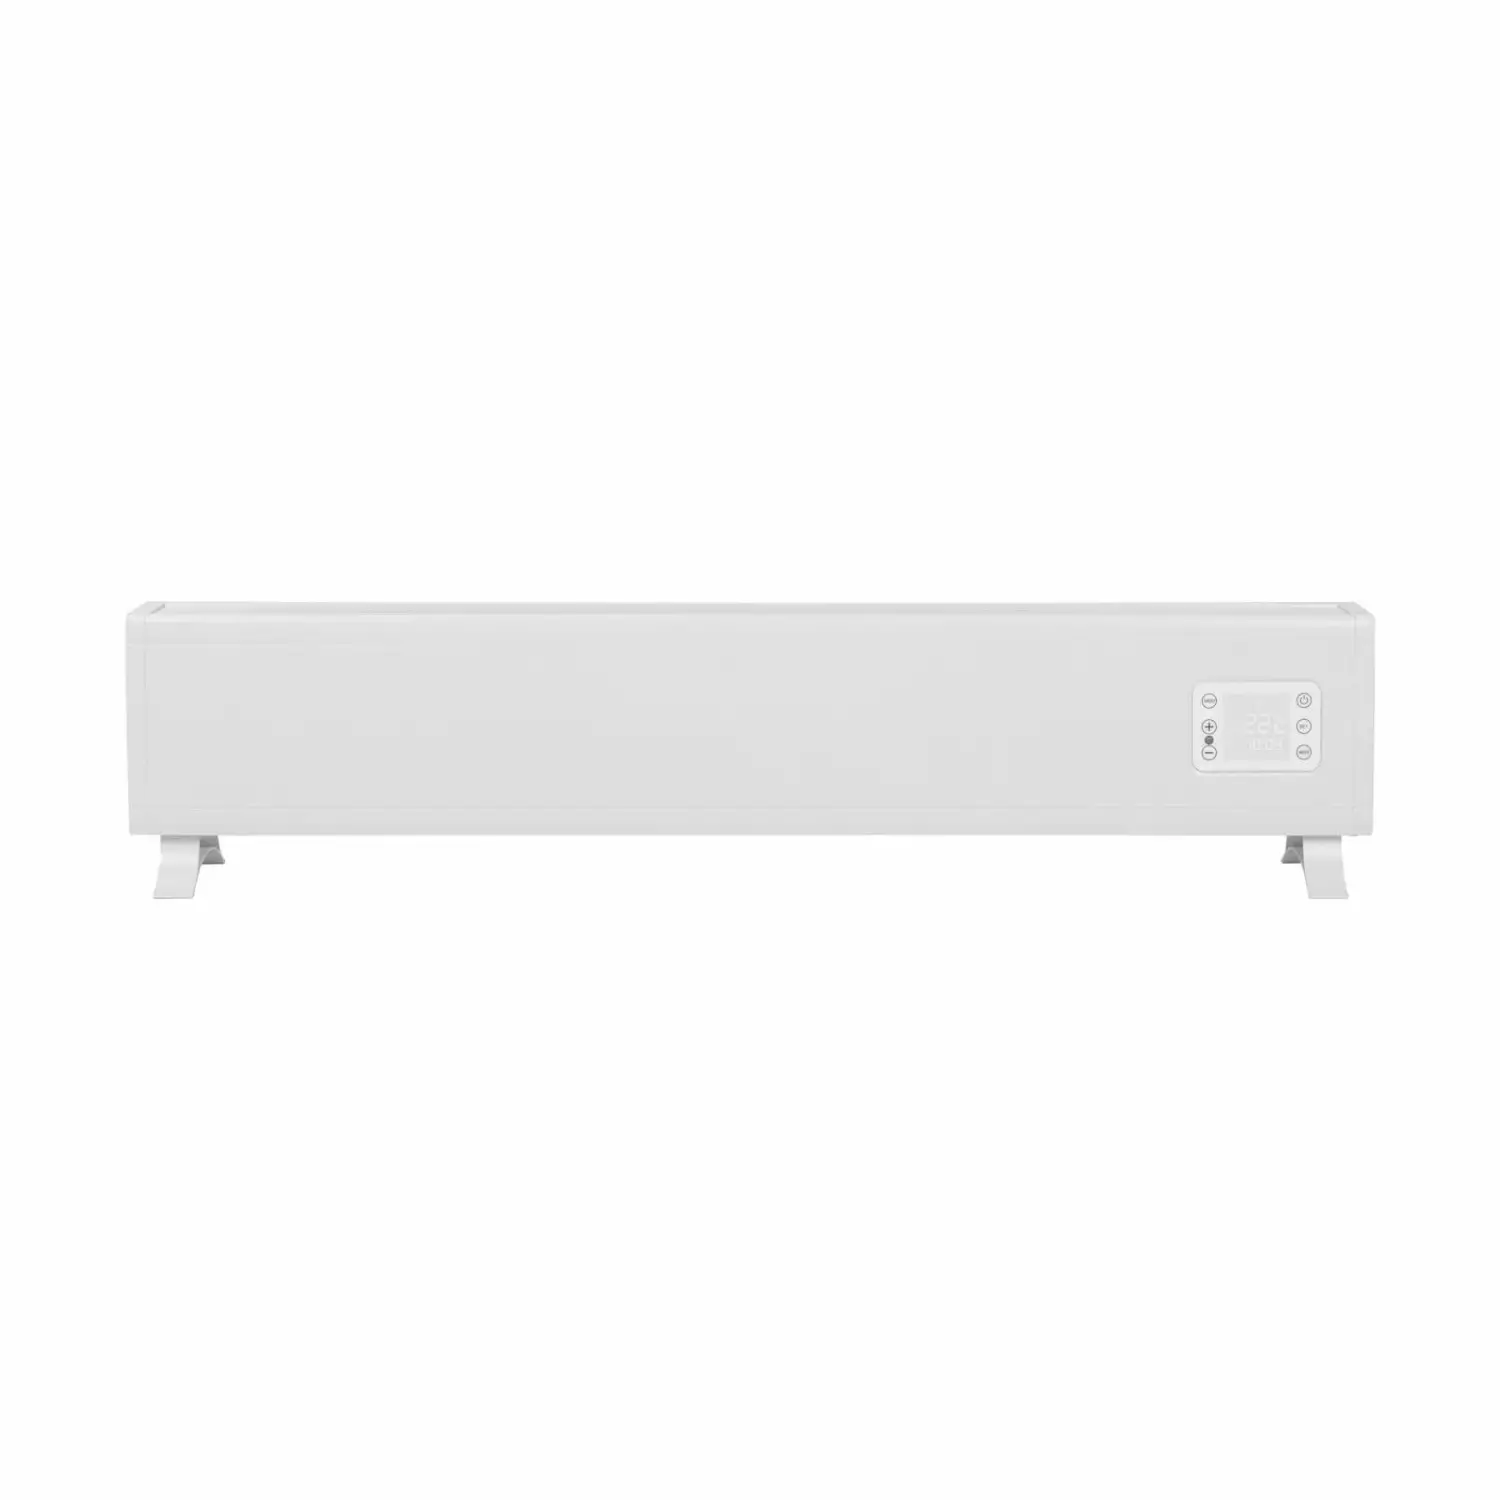 Eurom Alutherm Baseboard 1500 Wi-Fi White Convectorkachel - 1500W - 60m3-image